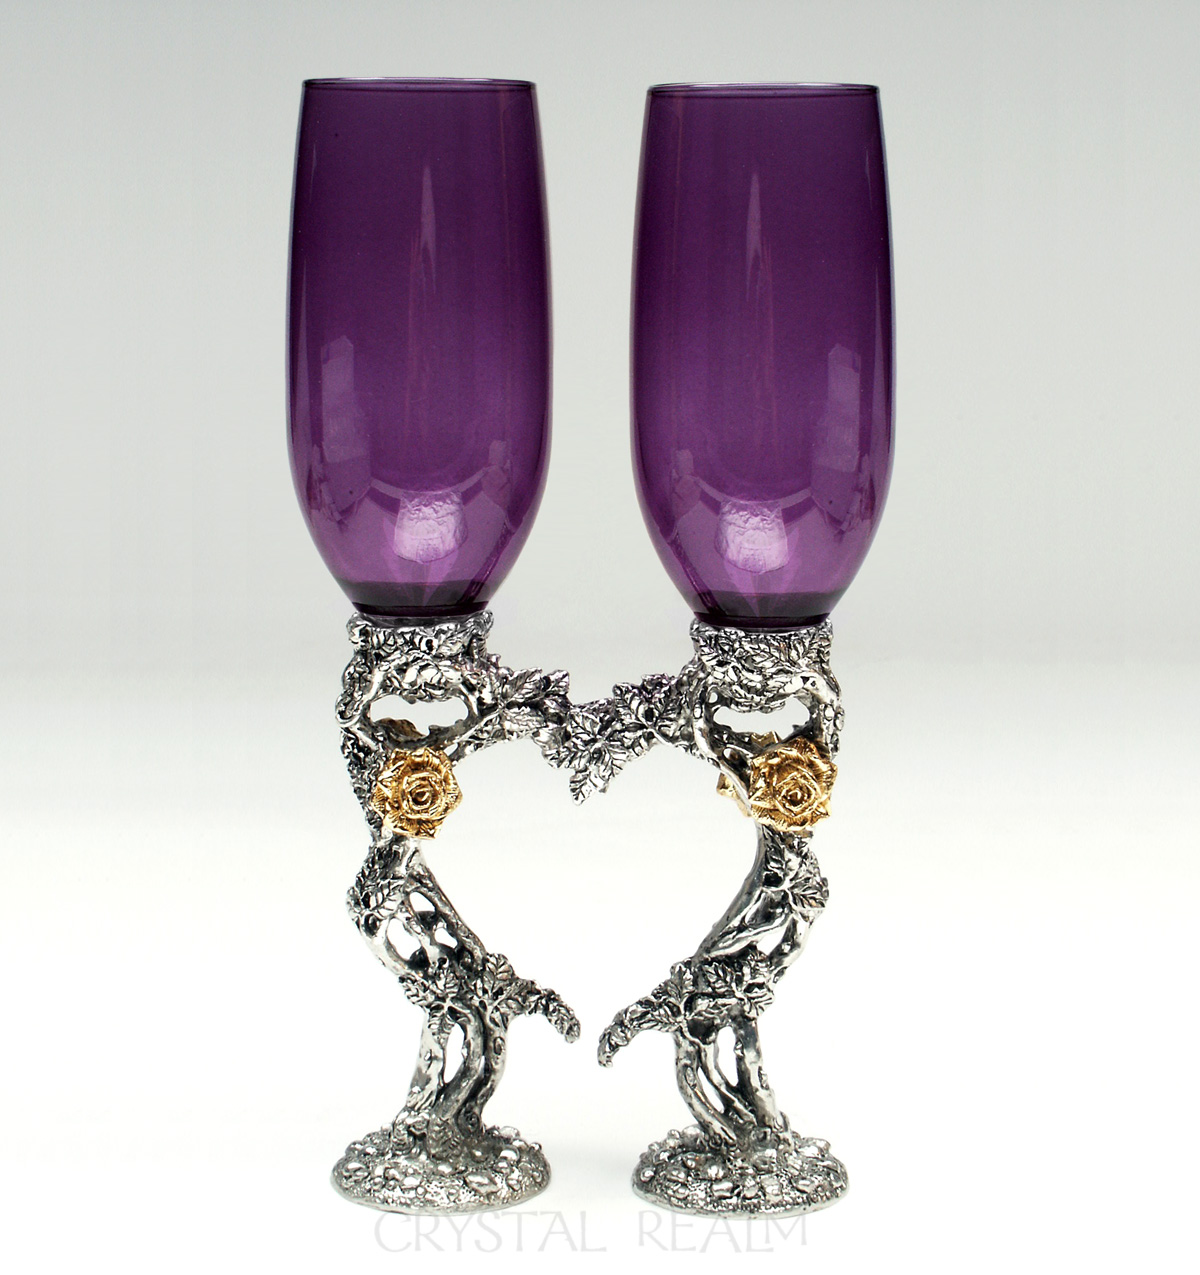 Purple champagne glasses with 23k plated roses and a heart shape